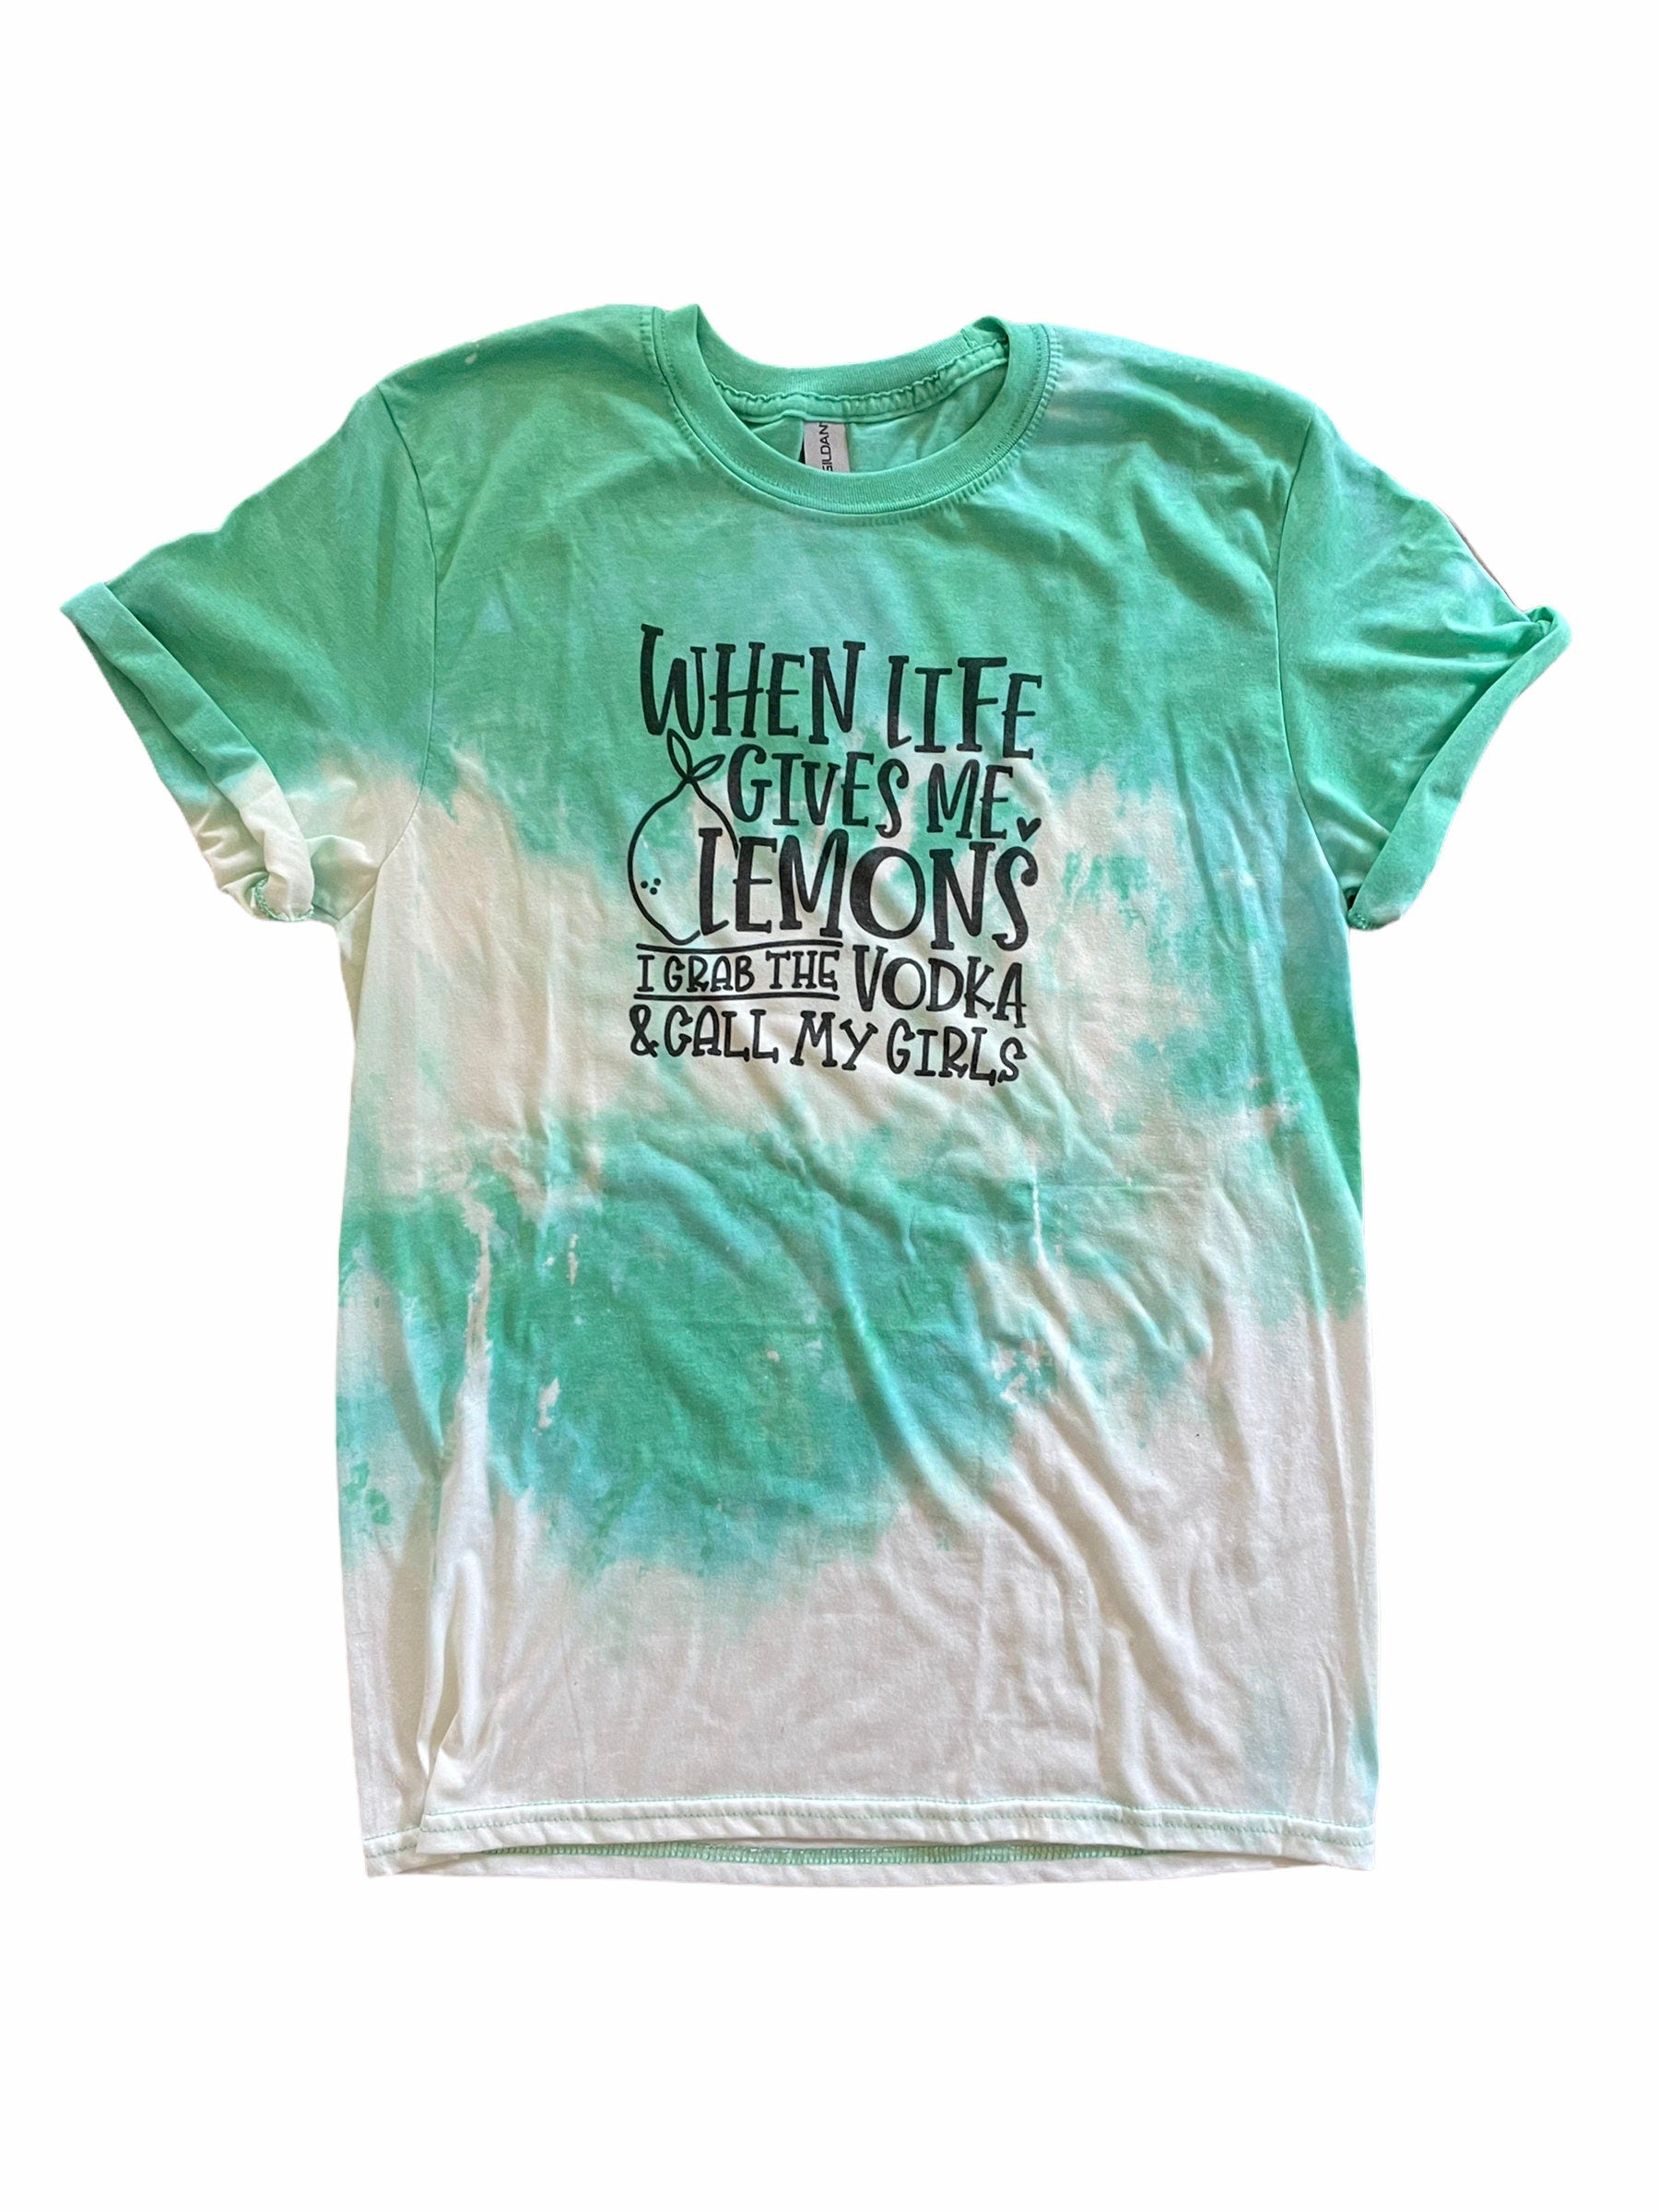 When Life Hands Me Lemons Tee, Graphic Tee, Vintage T-shirt, Bleached Tee